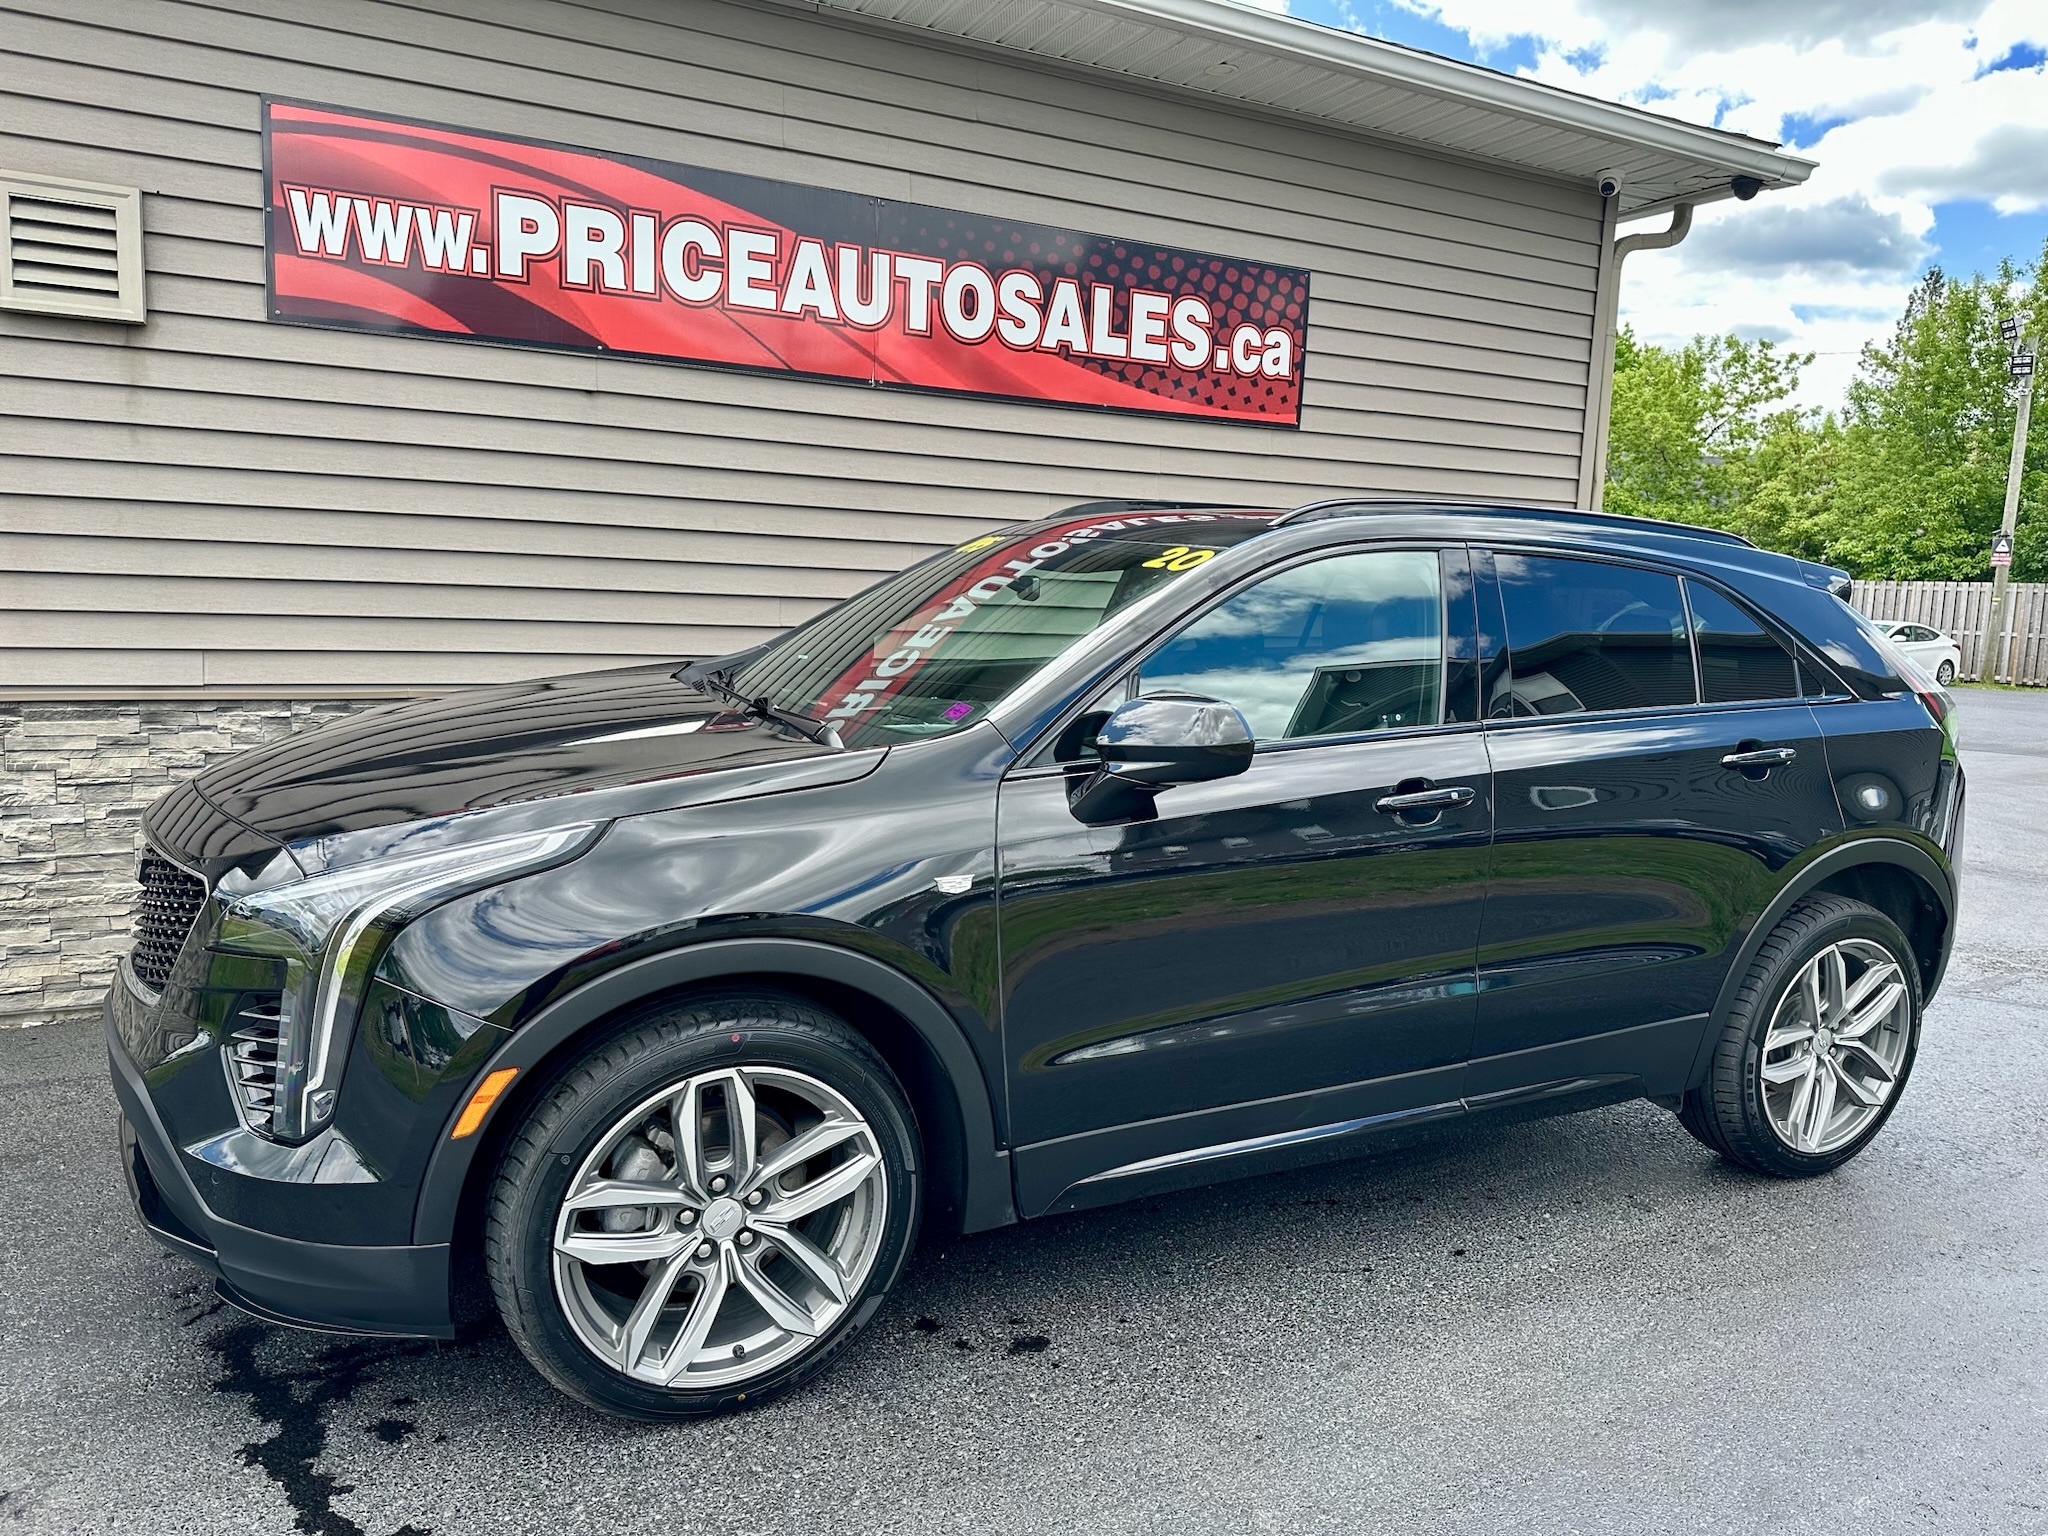 2020 Cadillac XT4 350T AWD Sport - EVERY OPTION POSSIBLE!!!